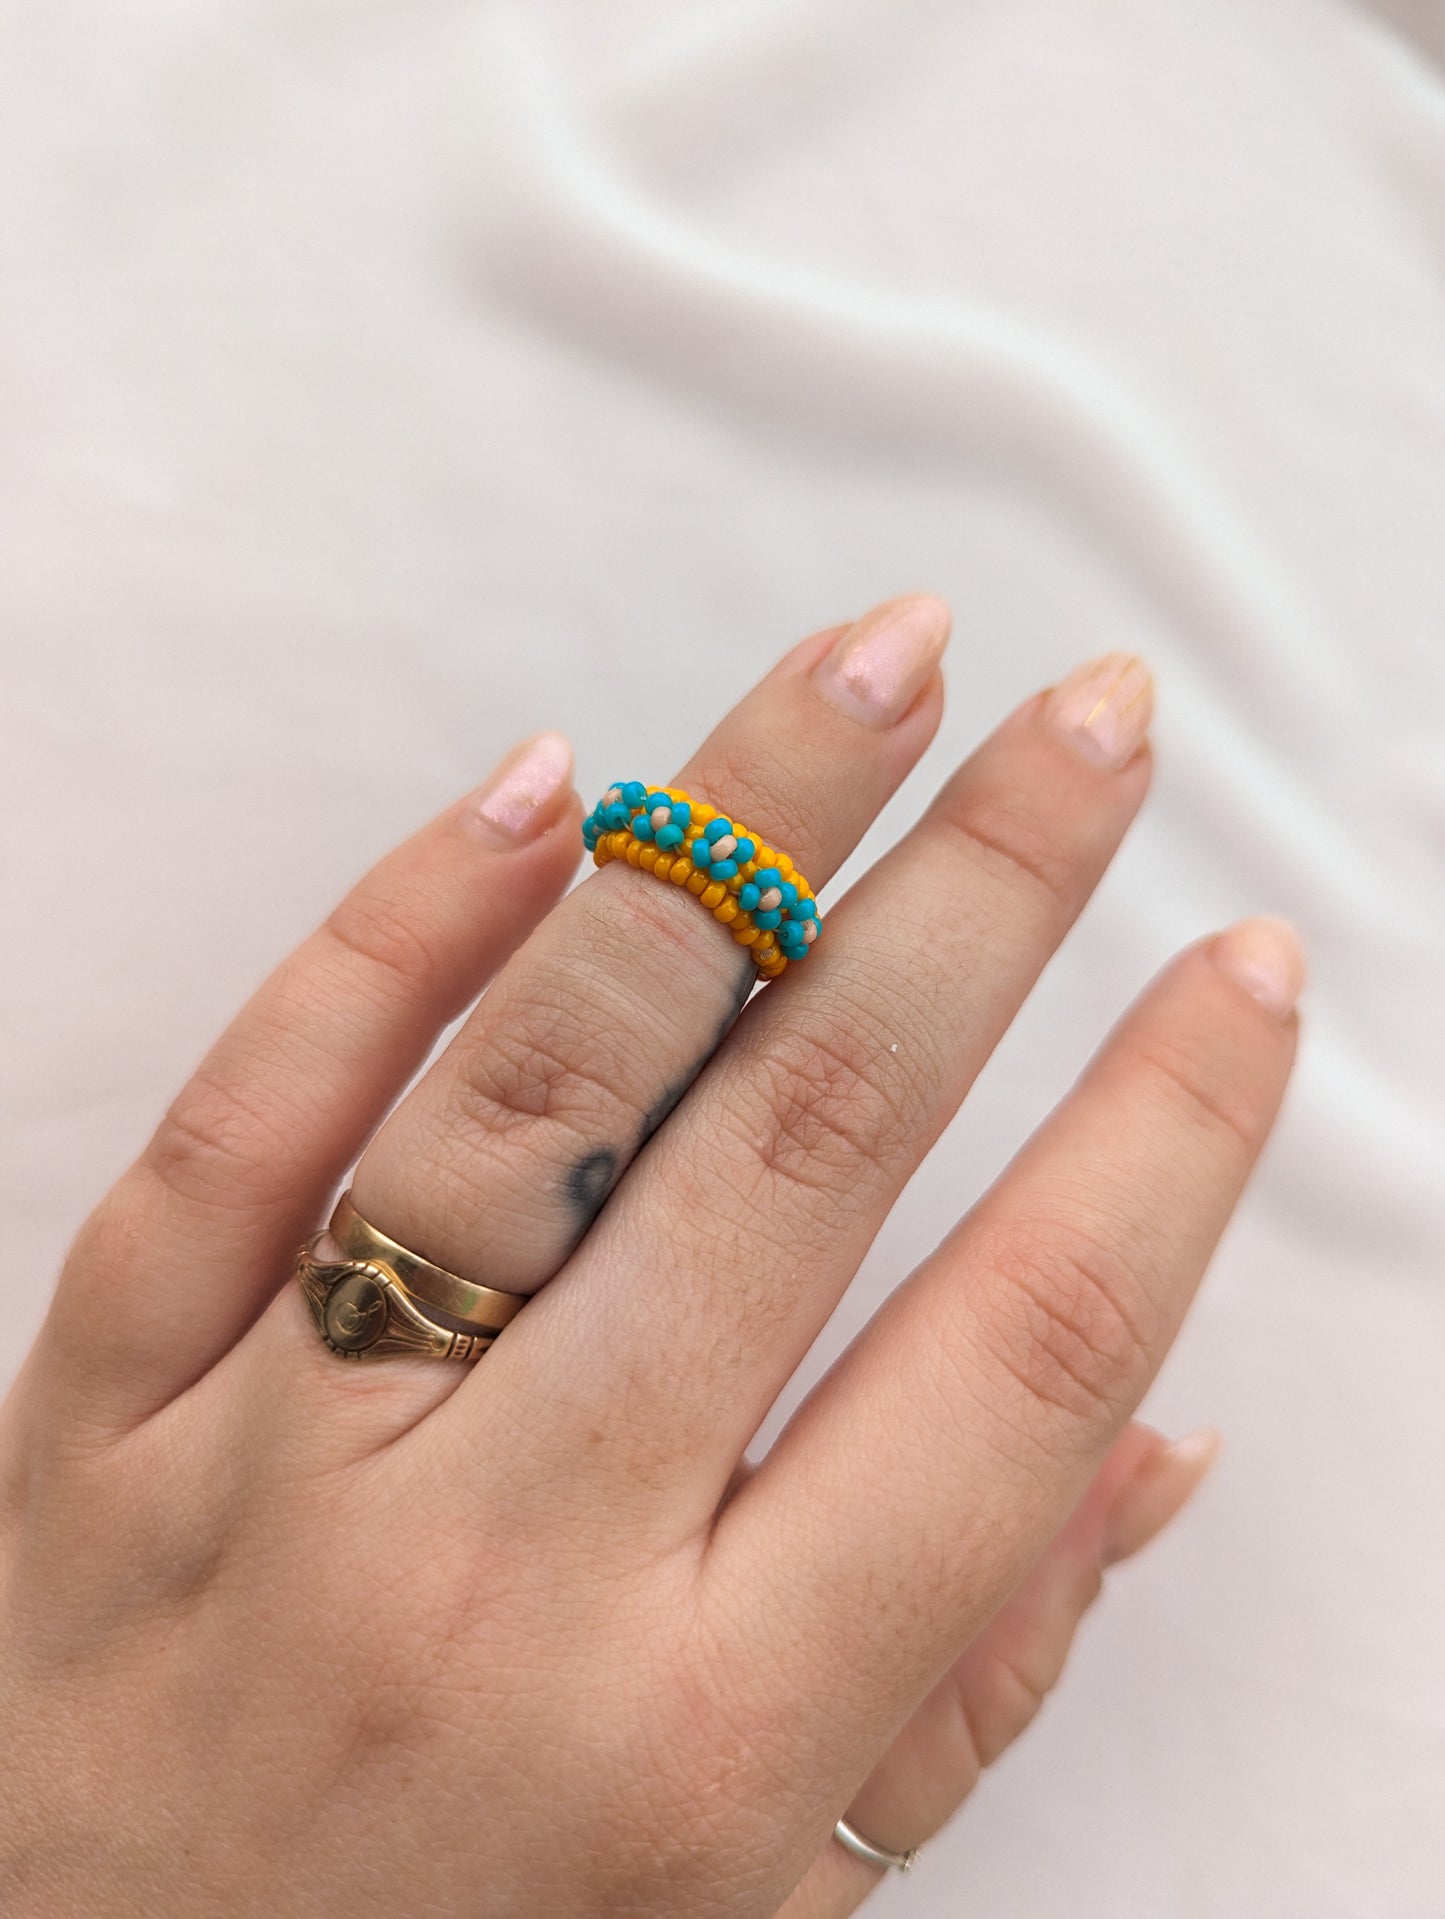 Chunky Ring - 4 Petal Flower - Mango & Teal - Choose Your Size